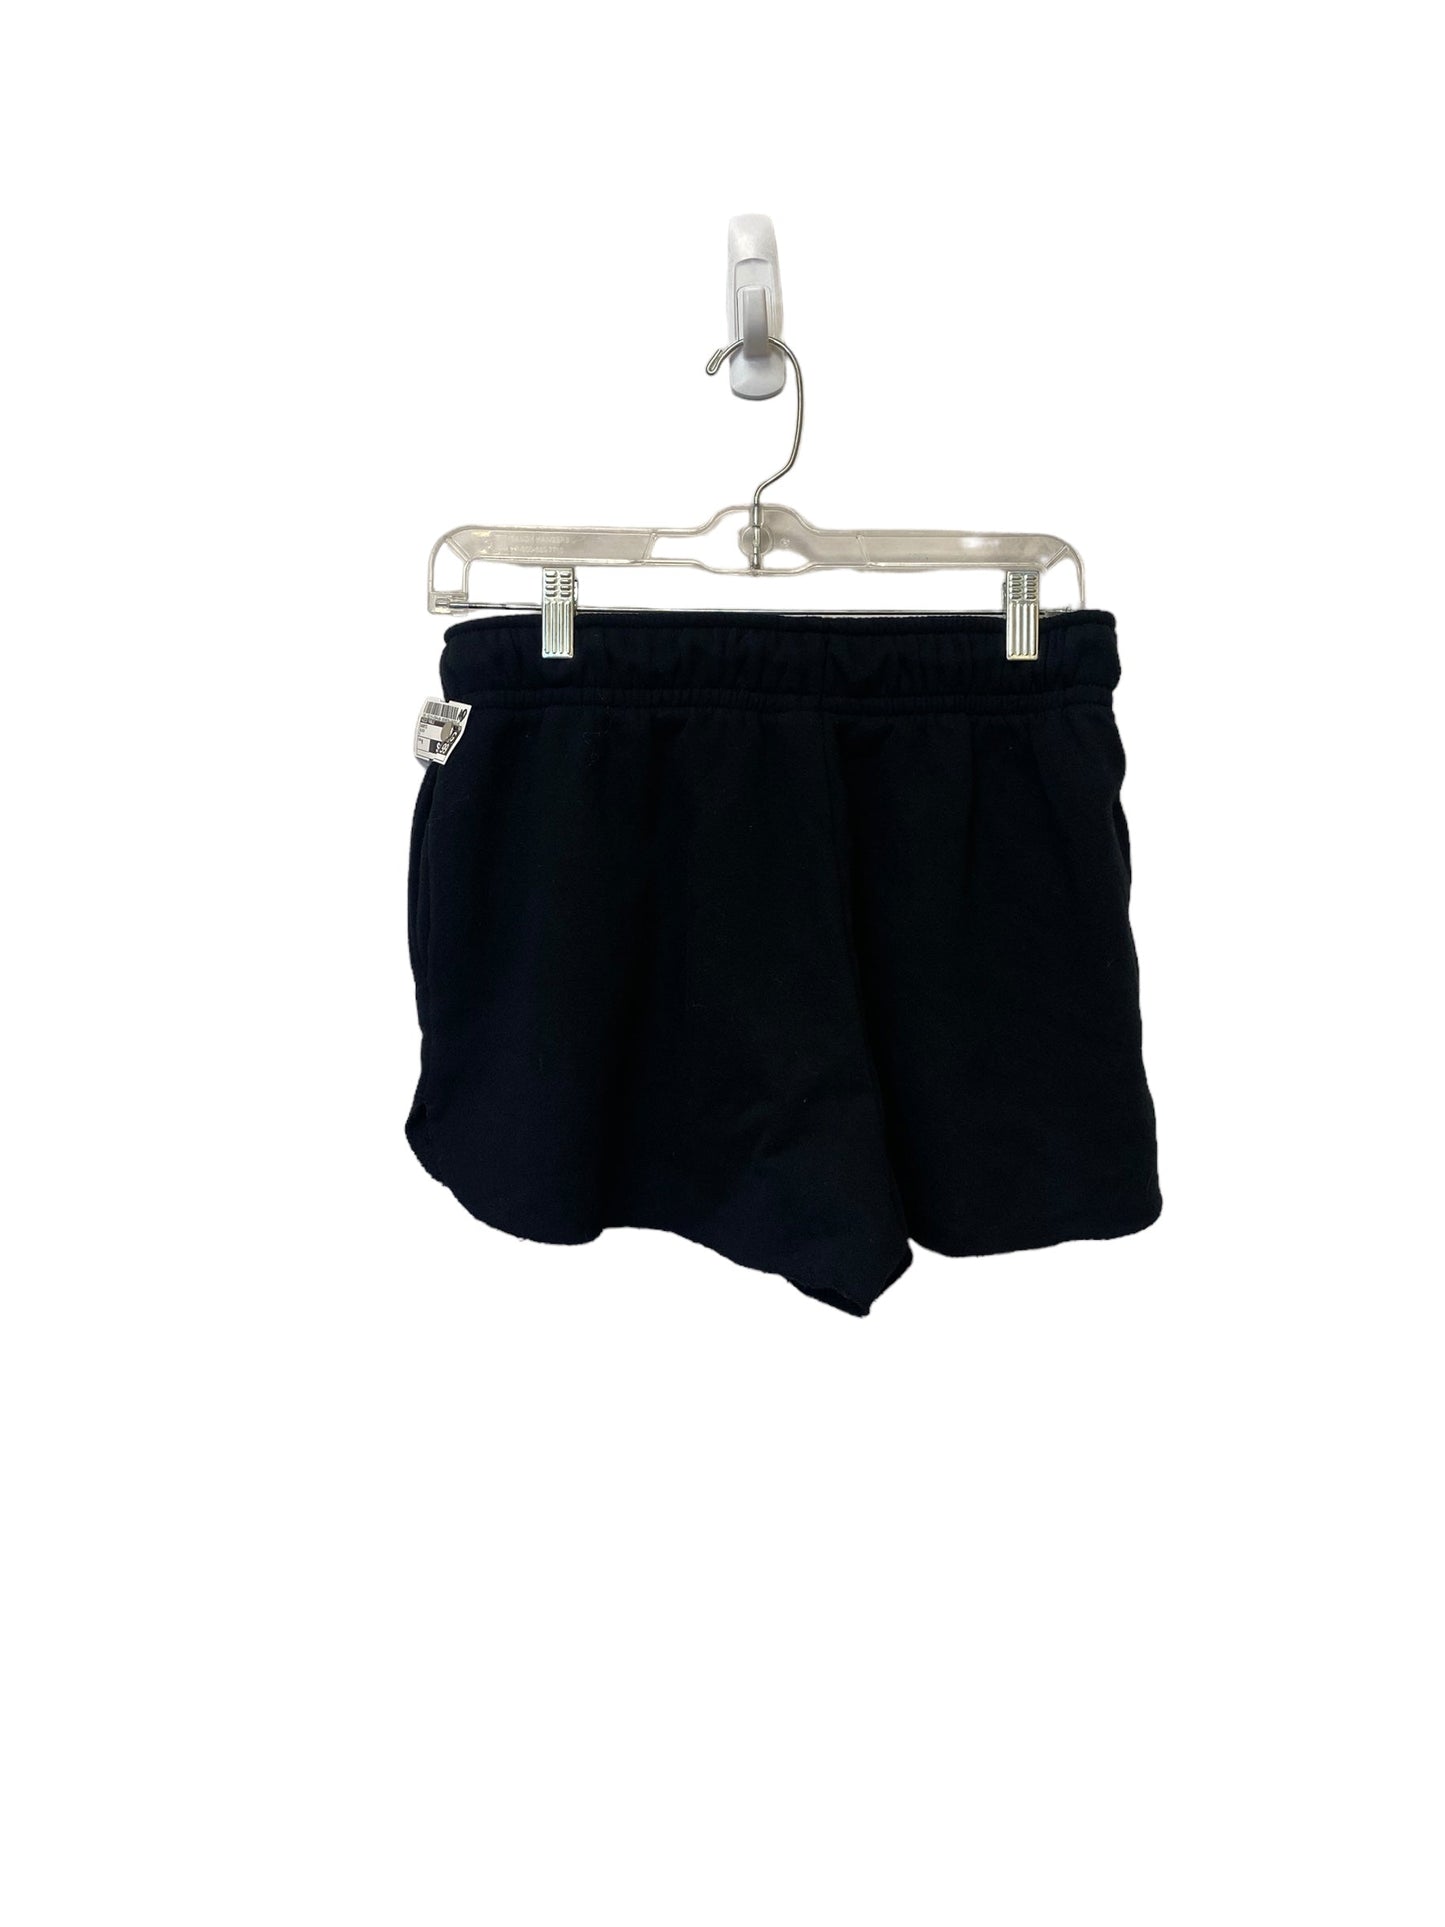 Black Shorts Wild Fable, Size M